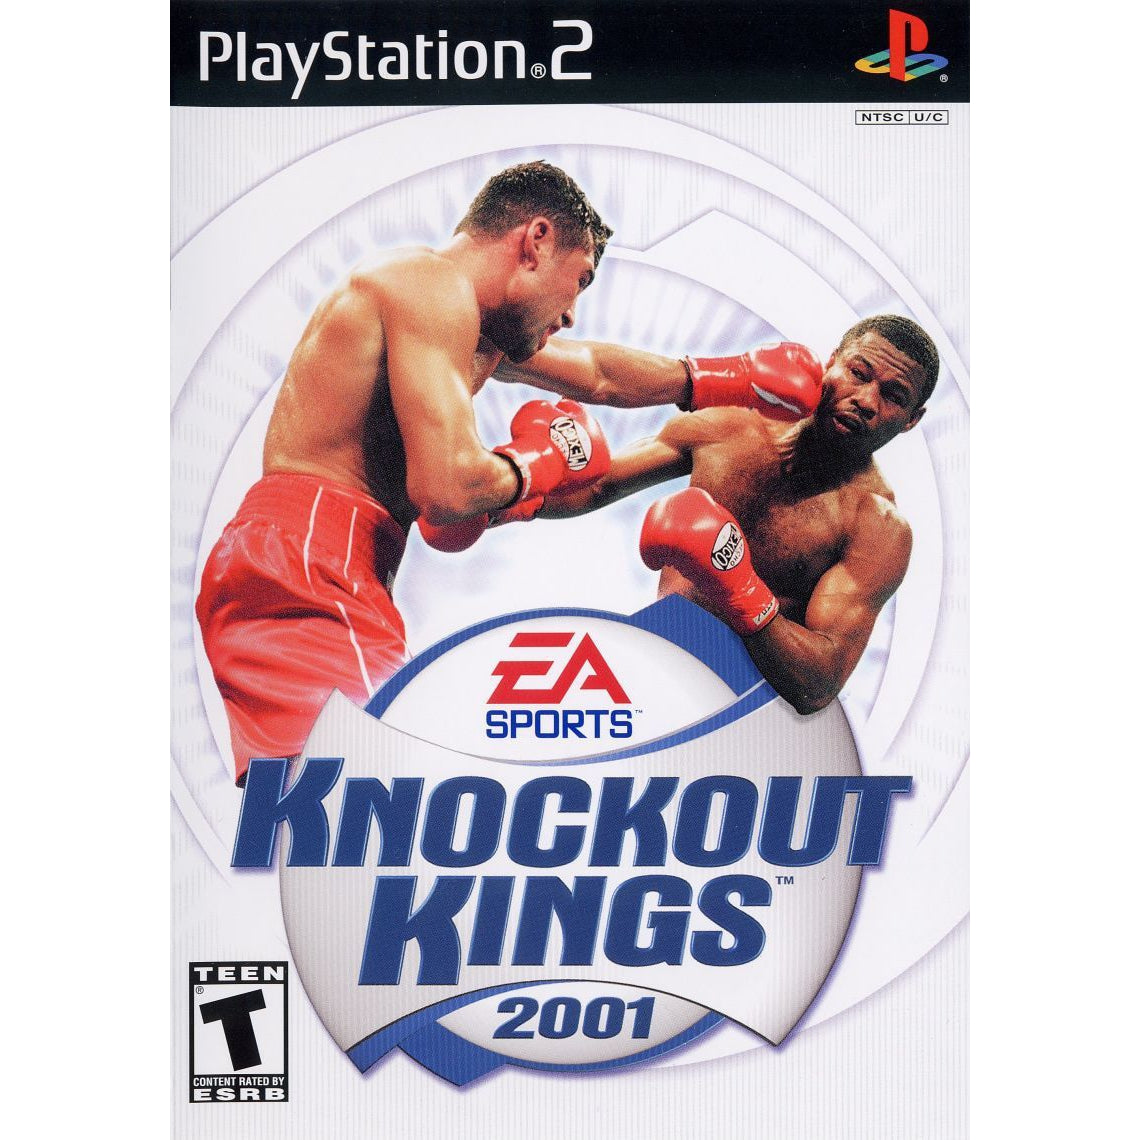 Knockout Kings 2001 - PlayStation 2 (PS2) Game Complete - YourGamingShop.com - Buy, Sell, Trade Video Games Online. 120 Day Warranty. Satisfaction Guaranteed.